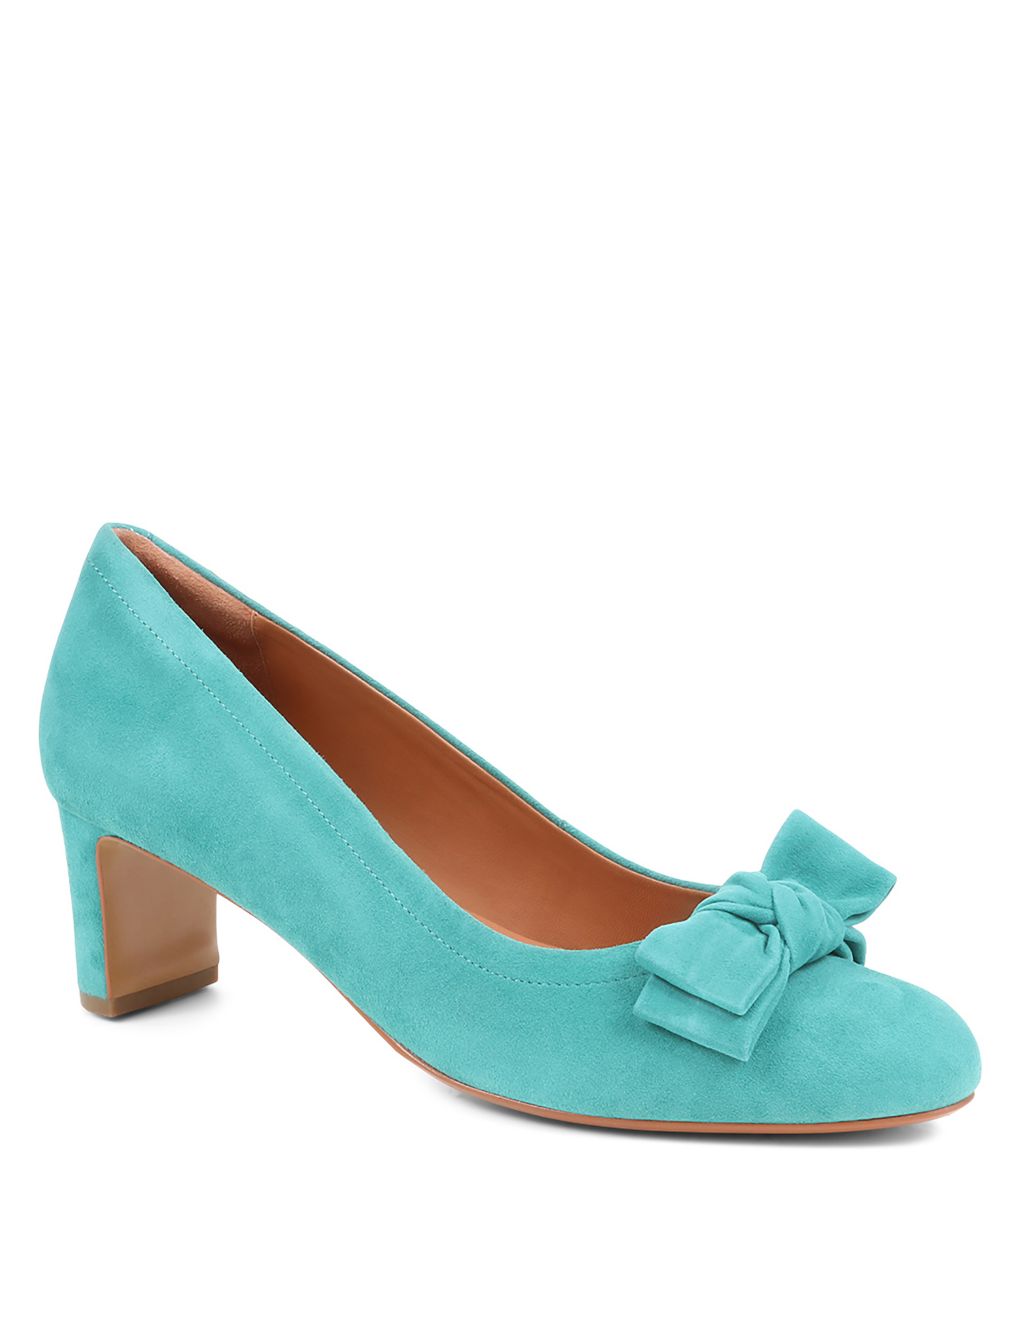 Suede Bow Block Heel Court Shoes image 2